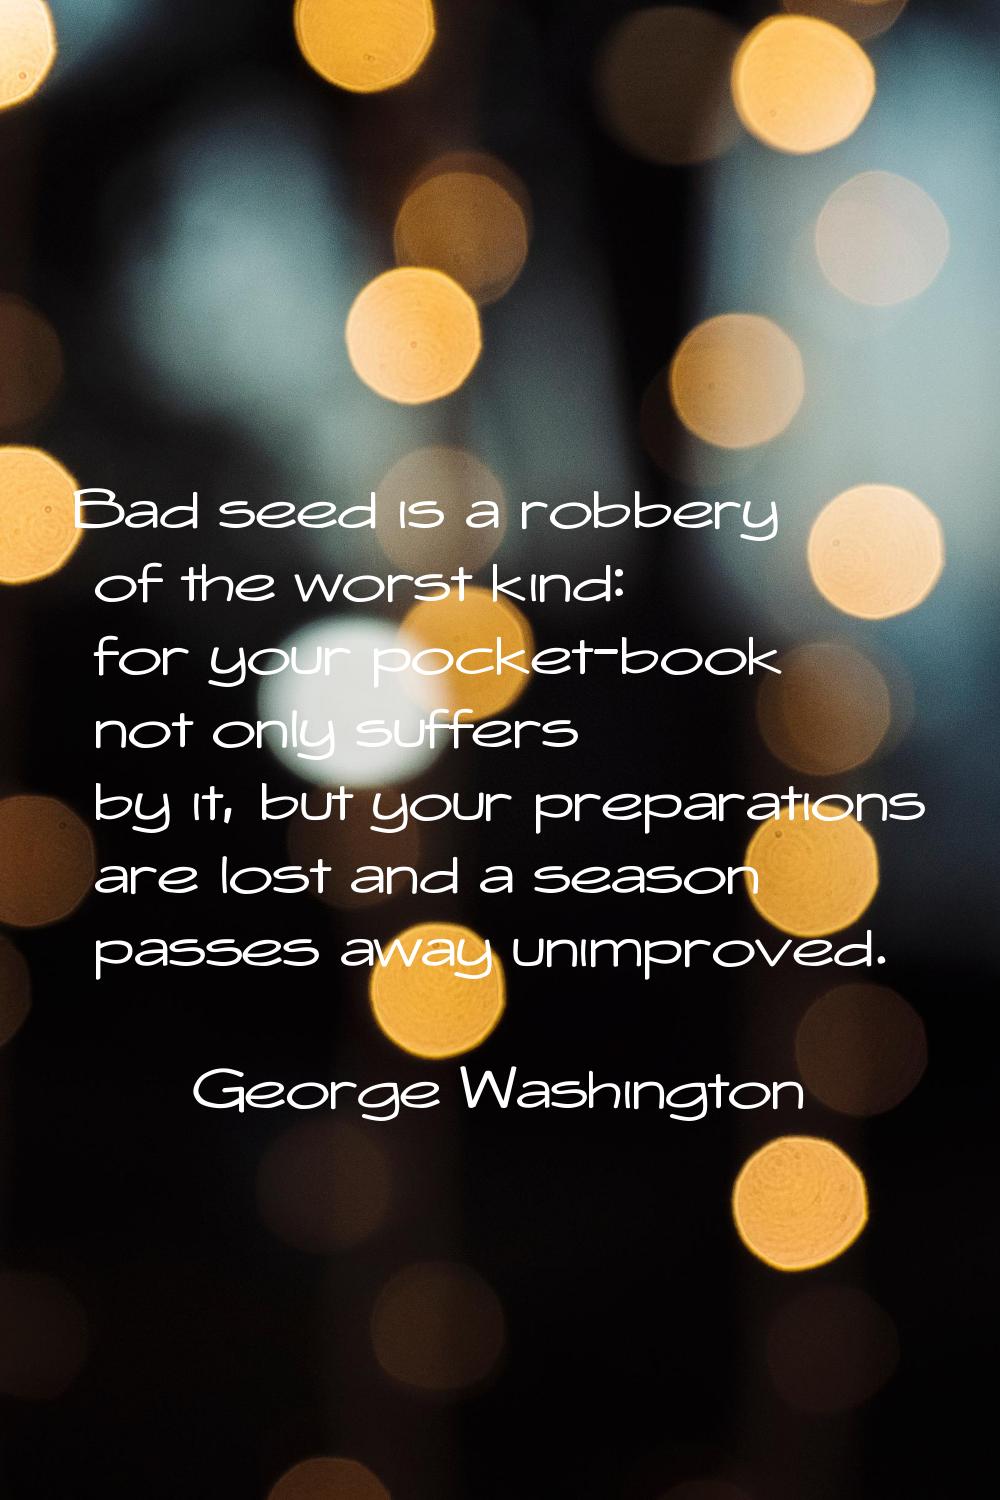 Bad seed is a robbery of the worst kind: for your pocket-book not only suffers by it, but your prep